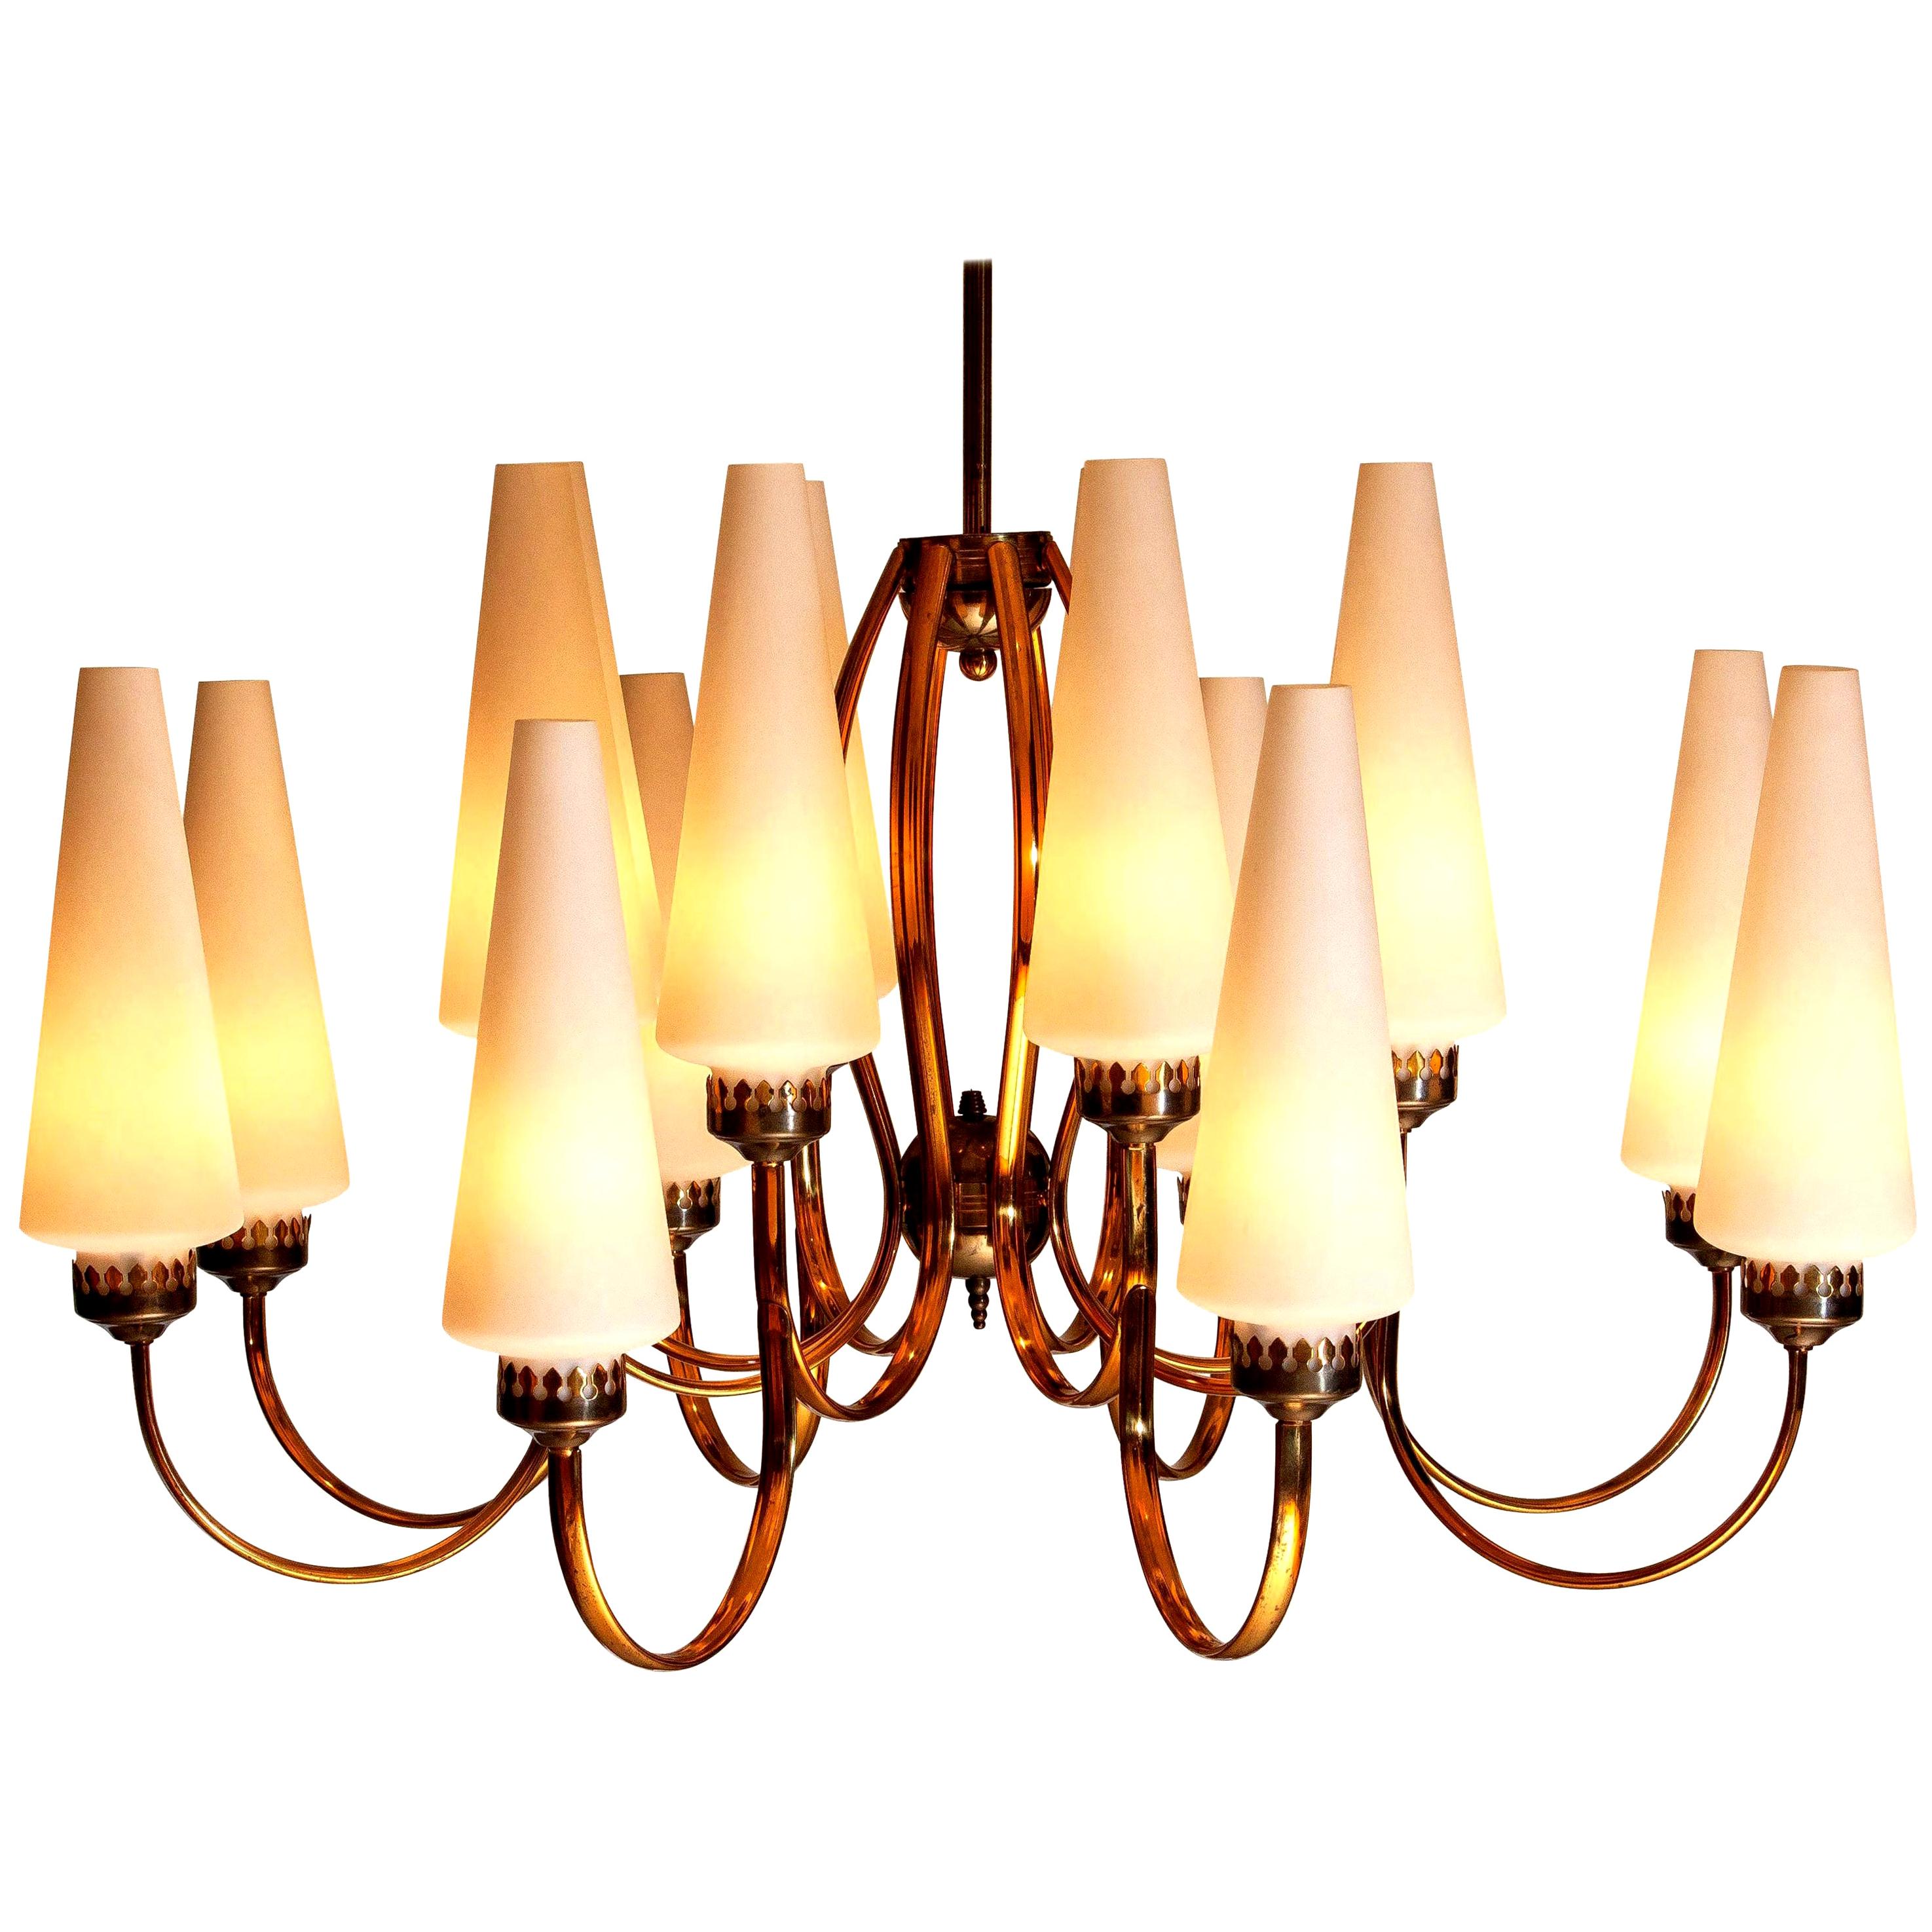 Exceptional big brass extra large chandelier with sixteen big Murano vases made in the 1950s, Italy.
Measures: The diameter of these big chandelier is 90 cm or 36 inches.
The height of the murano vases is 30 cm or 12 inches.
The total height is